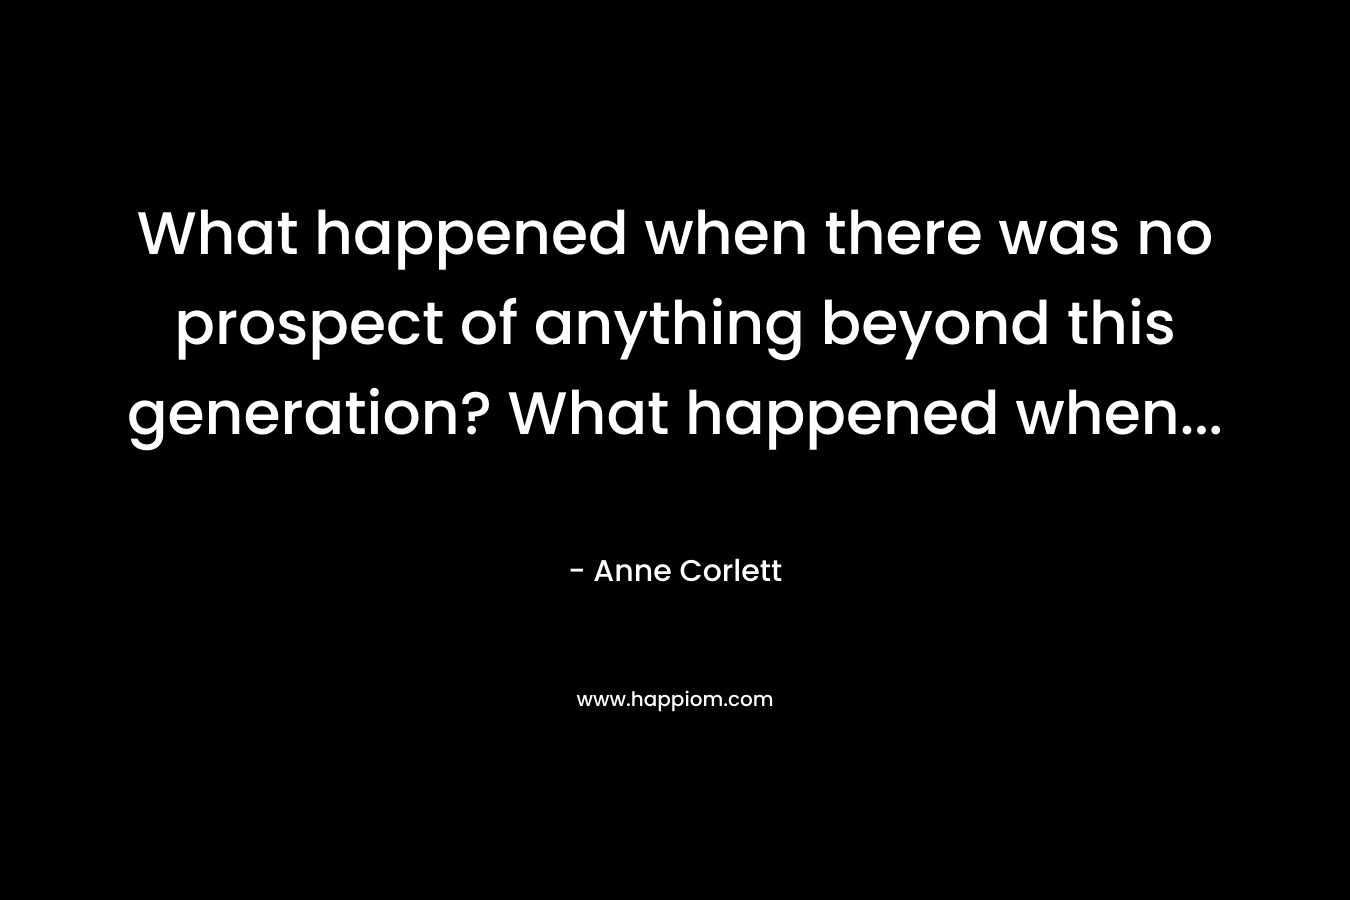 What happened when there was no prospect of anything beyond this generation? What happened when...